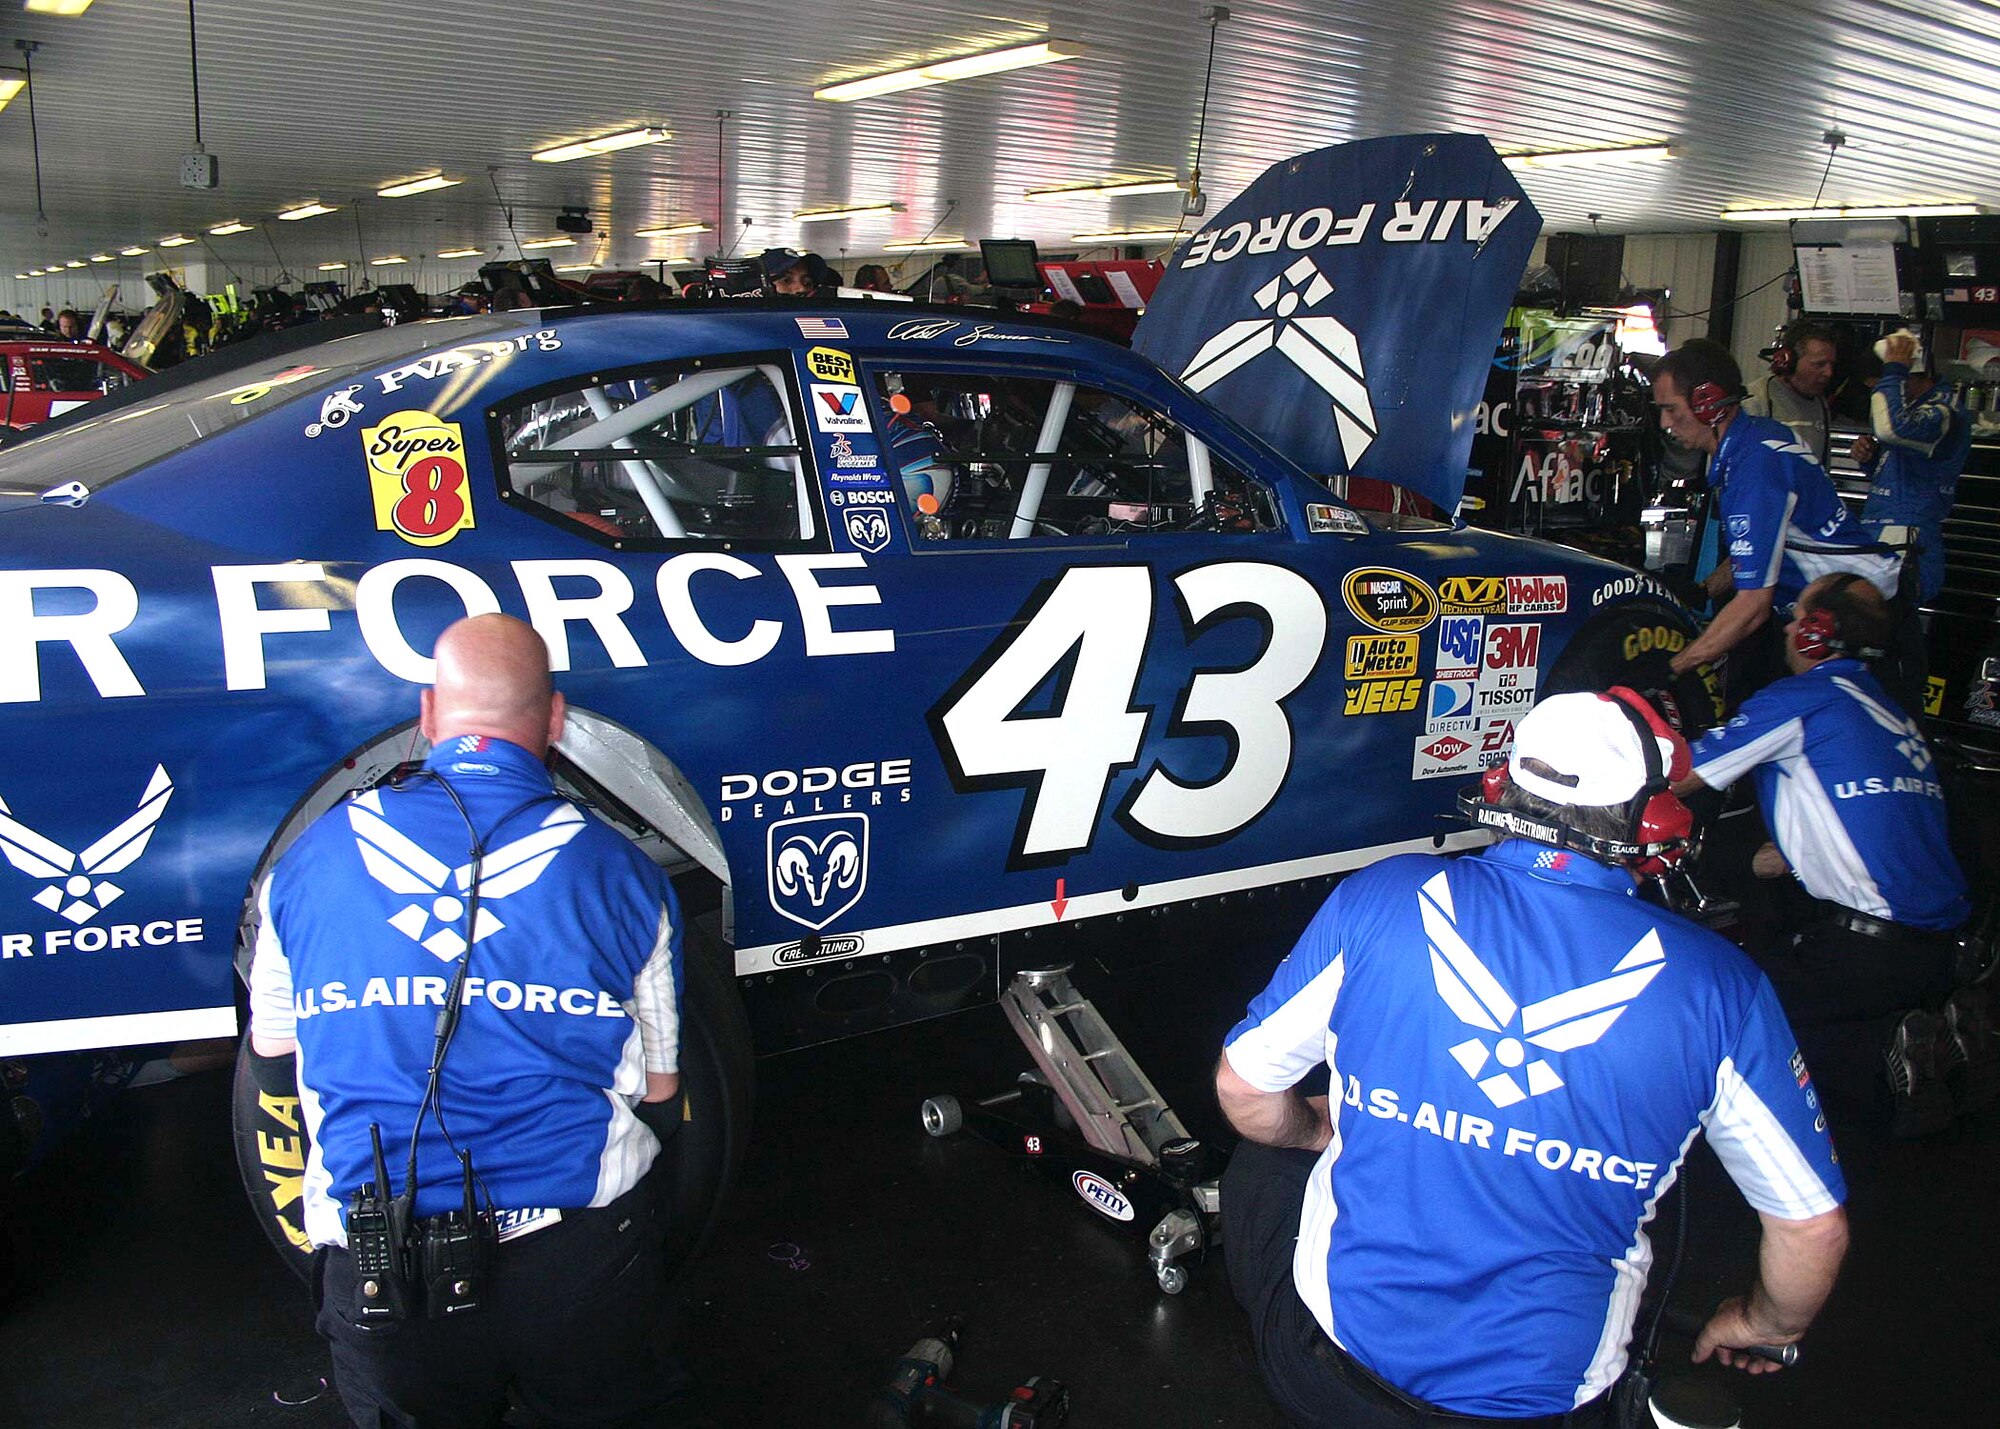 Crew members prepare the No. 43 car for a practice run at the Pocono Raceway. The Pennsylvania 500 was the fifth and final race of the season featuring the Air Force paint scheme. The Air Force is also an associate sponsor for the Richard Petty  Motorsports team in 33 other NASCAR races. (U.S. Air Force photo/Dale Eckroth)
